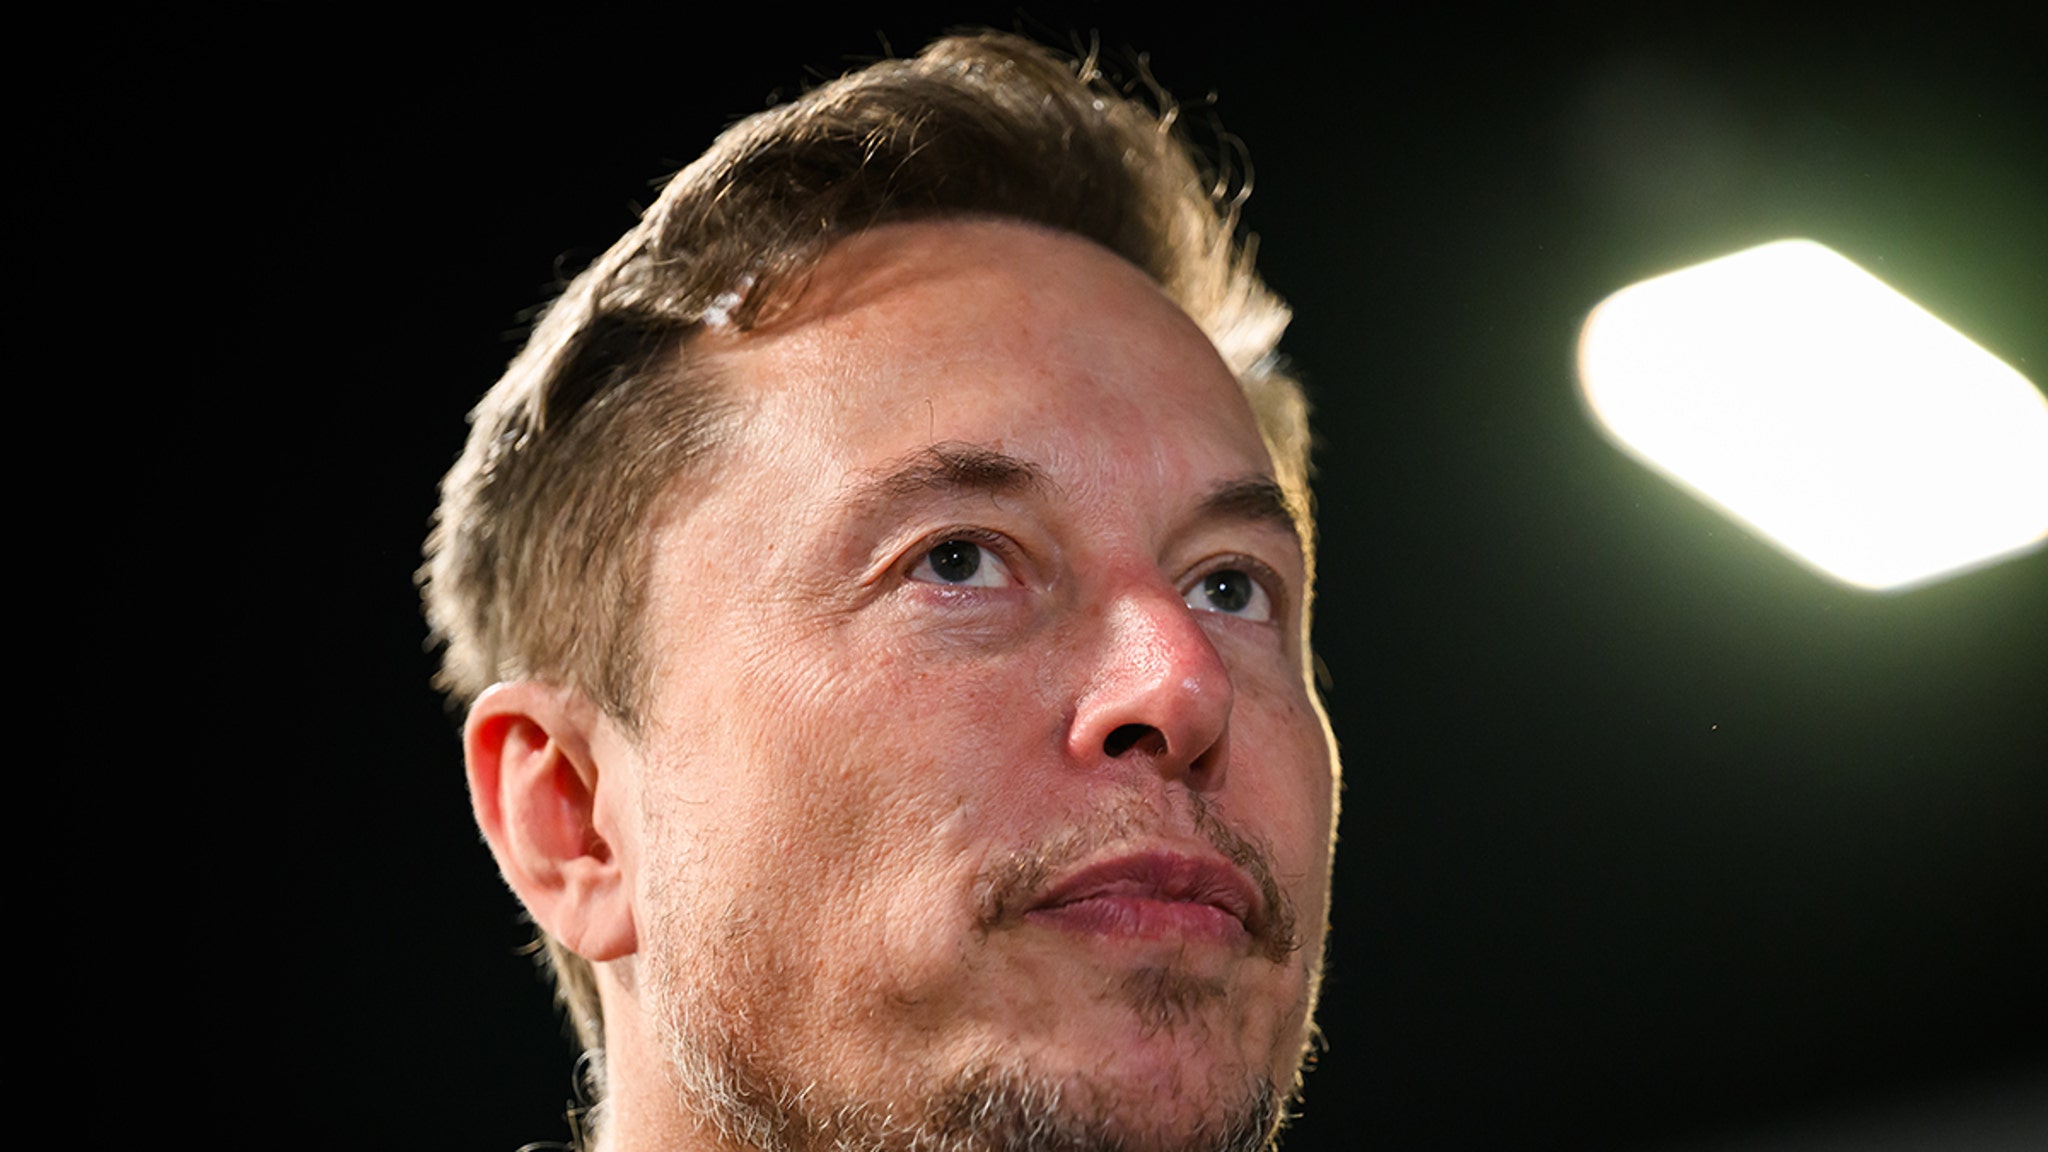 Elon Musk Sees ‘Truth’ in Antisemitic Tweet About Jews Hating Whites